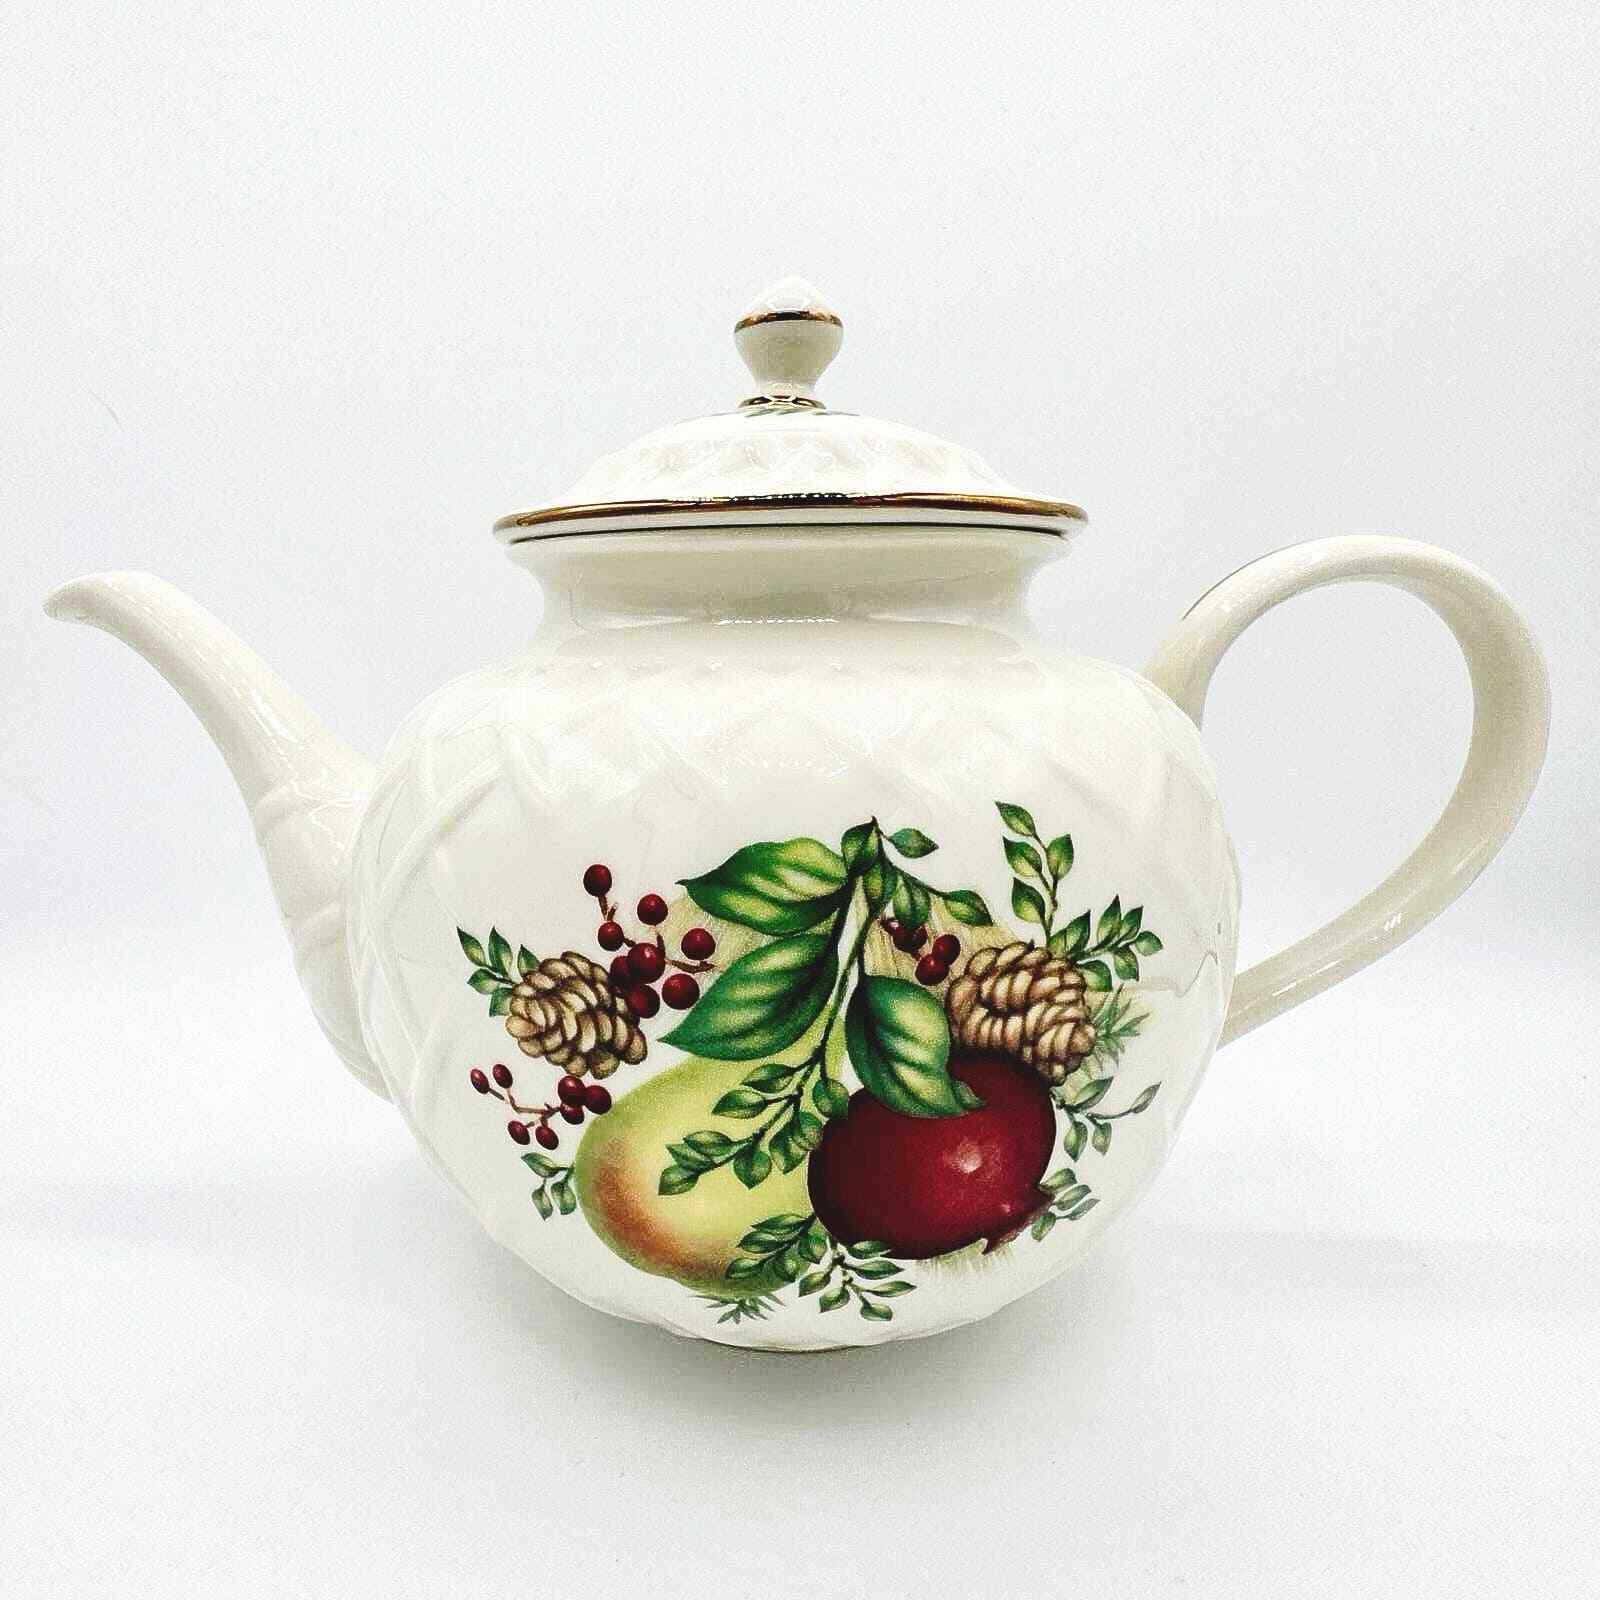 Lenox Williamsburg Boxwood and Pine Carved Teapot